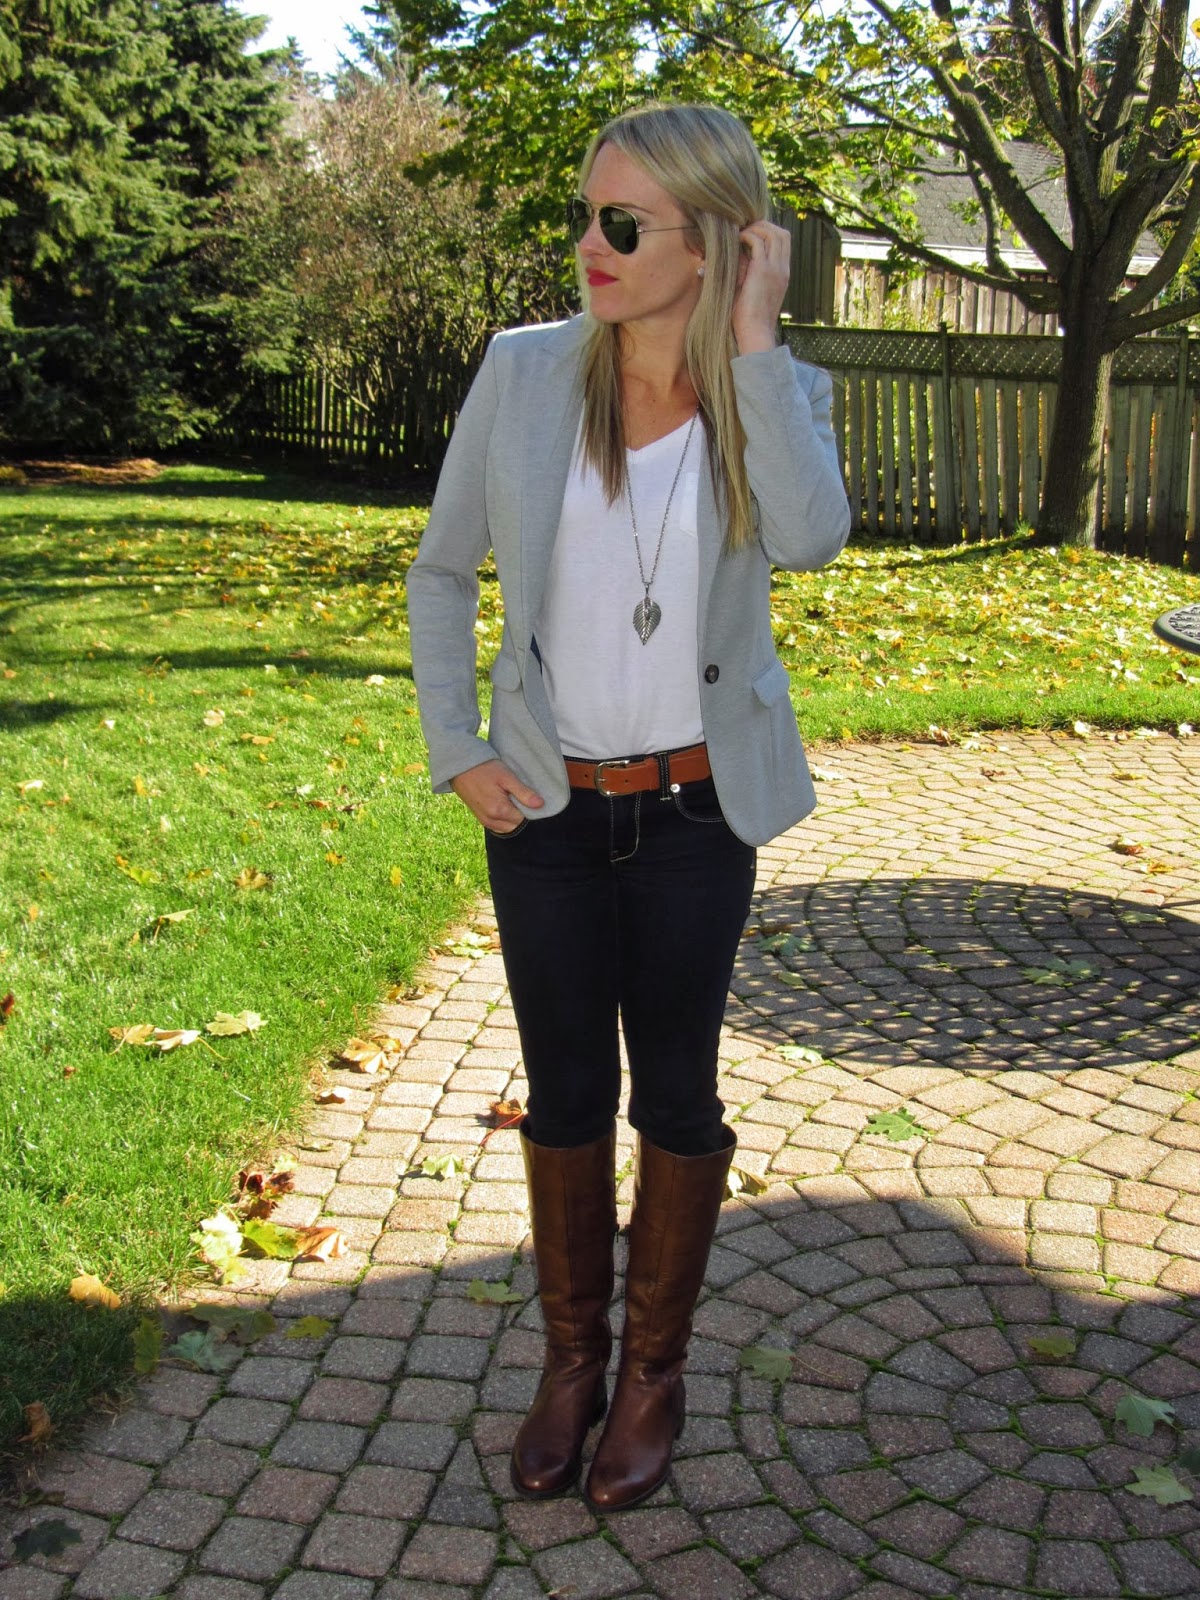 Sincerely Miss Ash: BLAZERS AND BOOTS